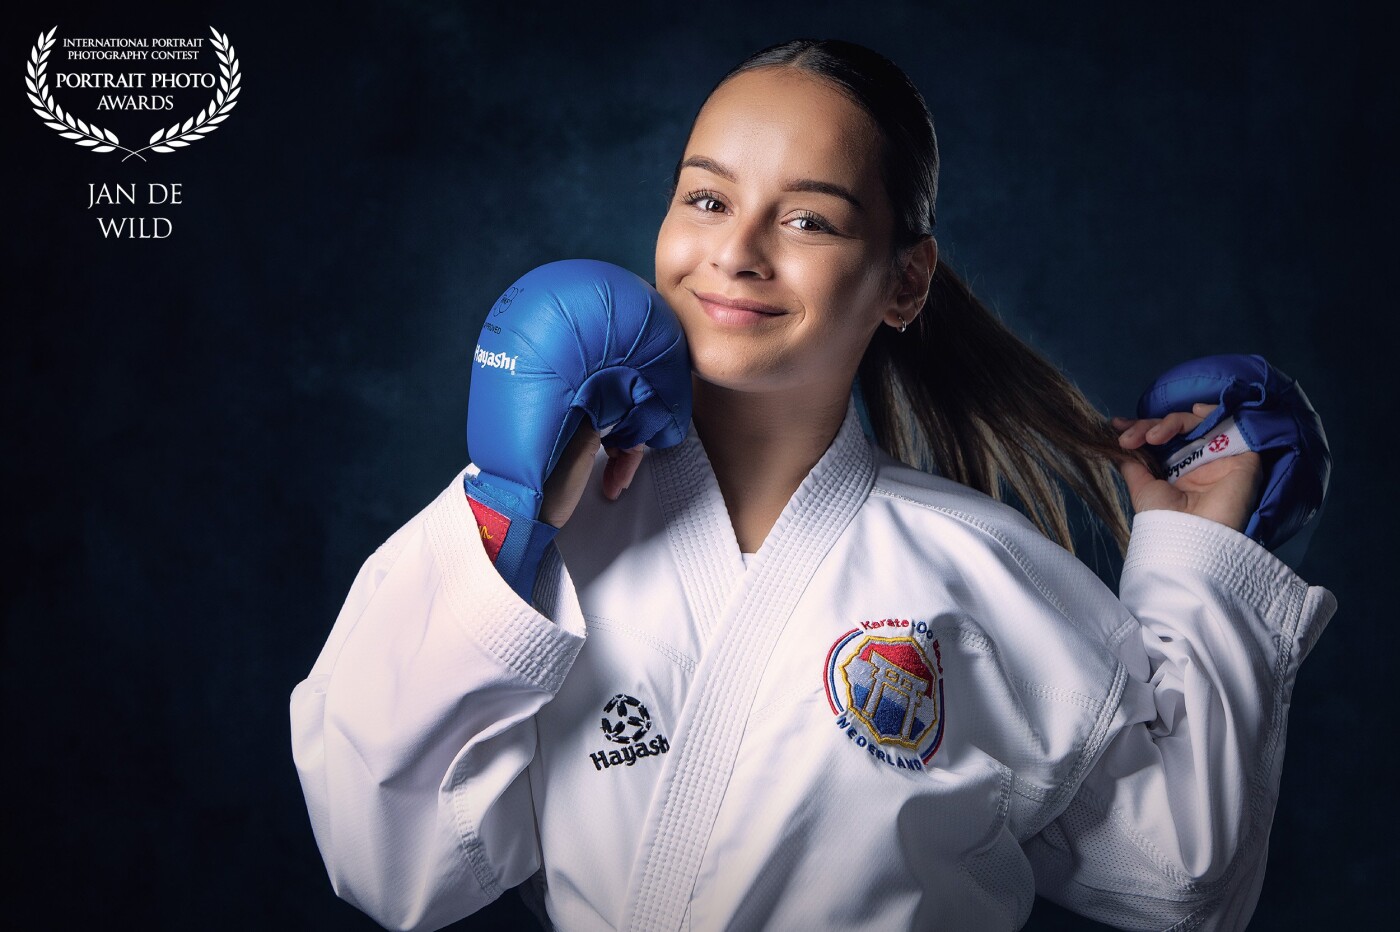 Yamaika came in the studio for some new portraits for herself. She is a member of the Dutch karate team and very talented. We had a lot of fun in the studio.